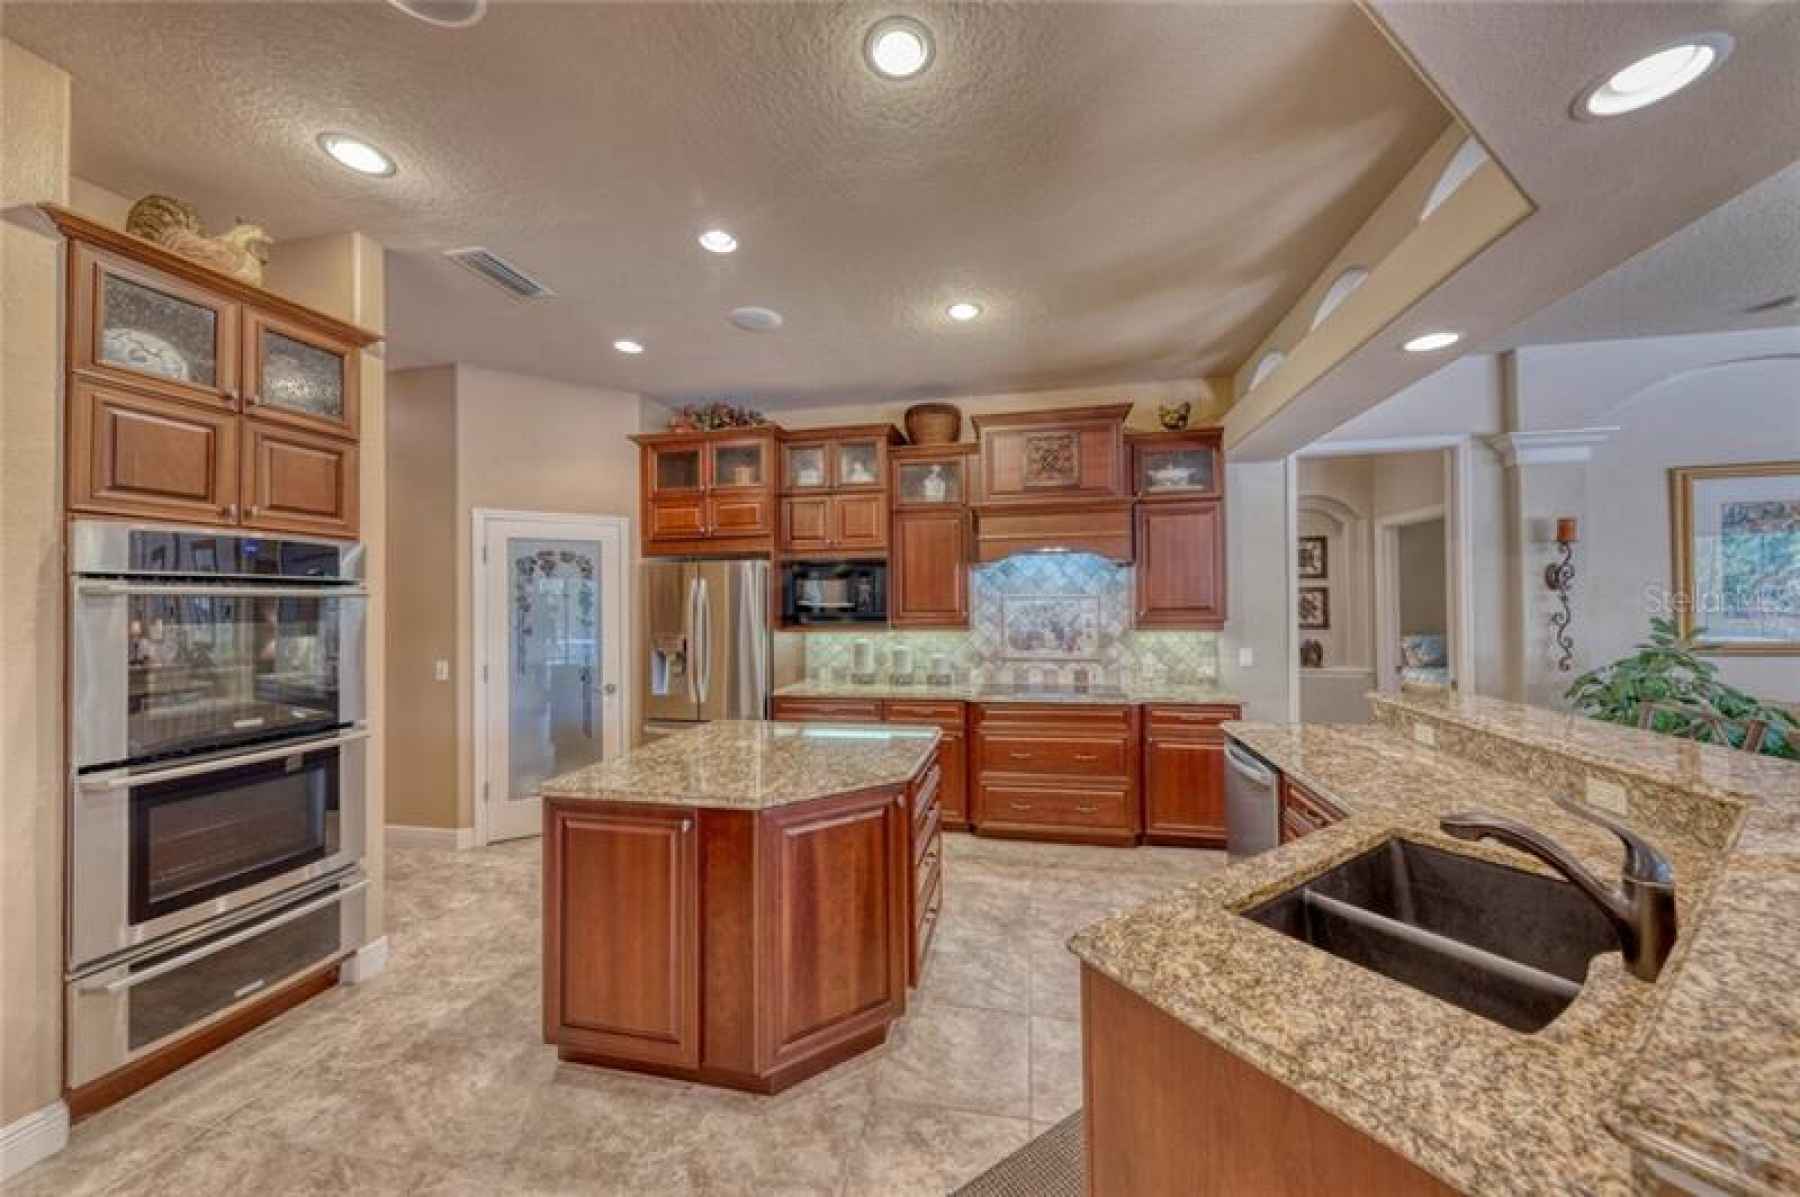 Kitchen... notice walk in pantry, double oven, warming drawer and ample storage space